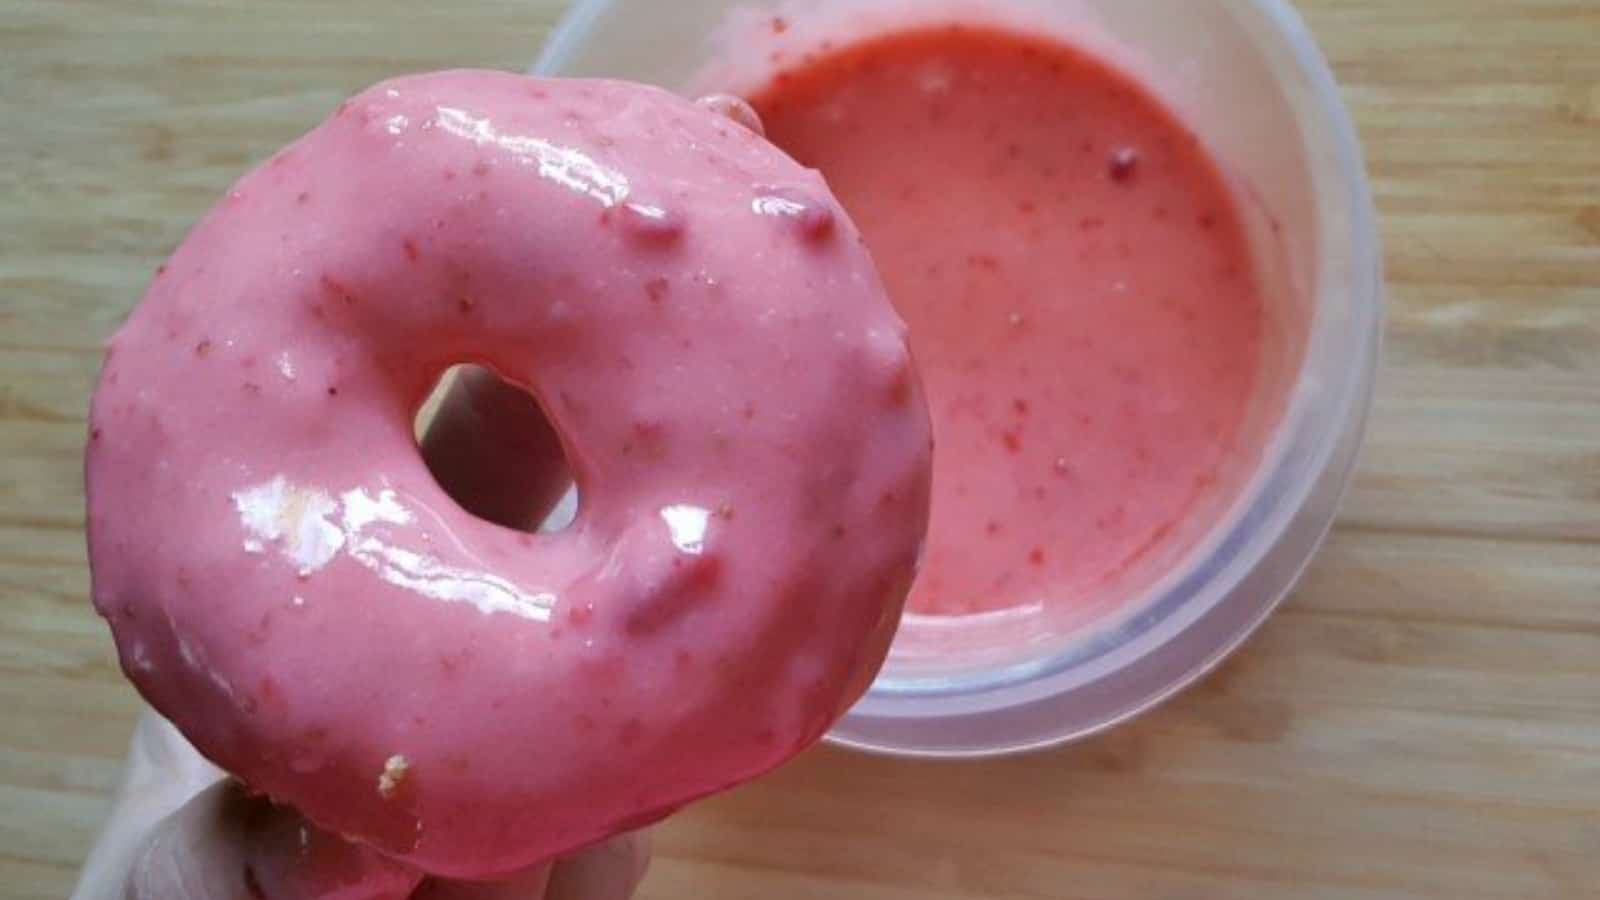 Image shows a freshly dipped strawberry donut held over the glaze.